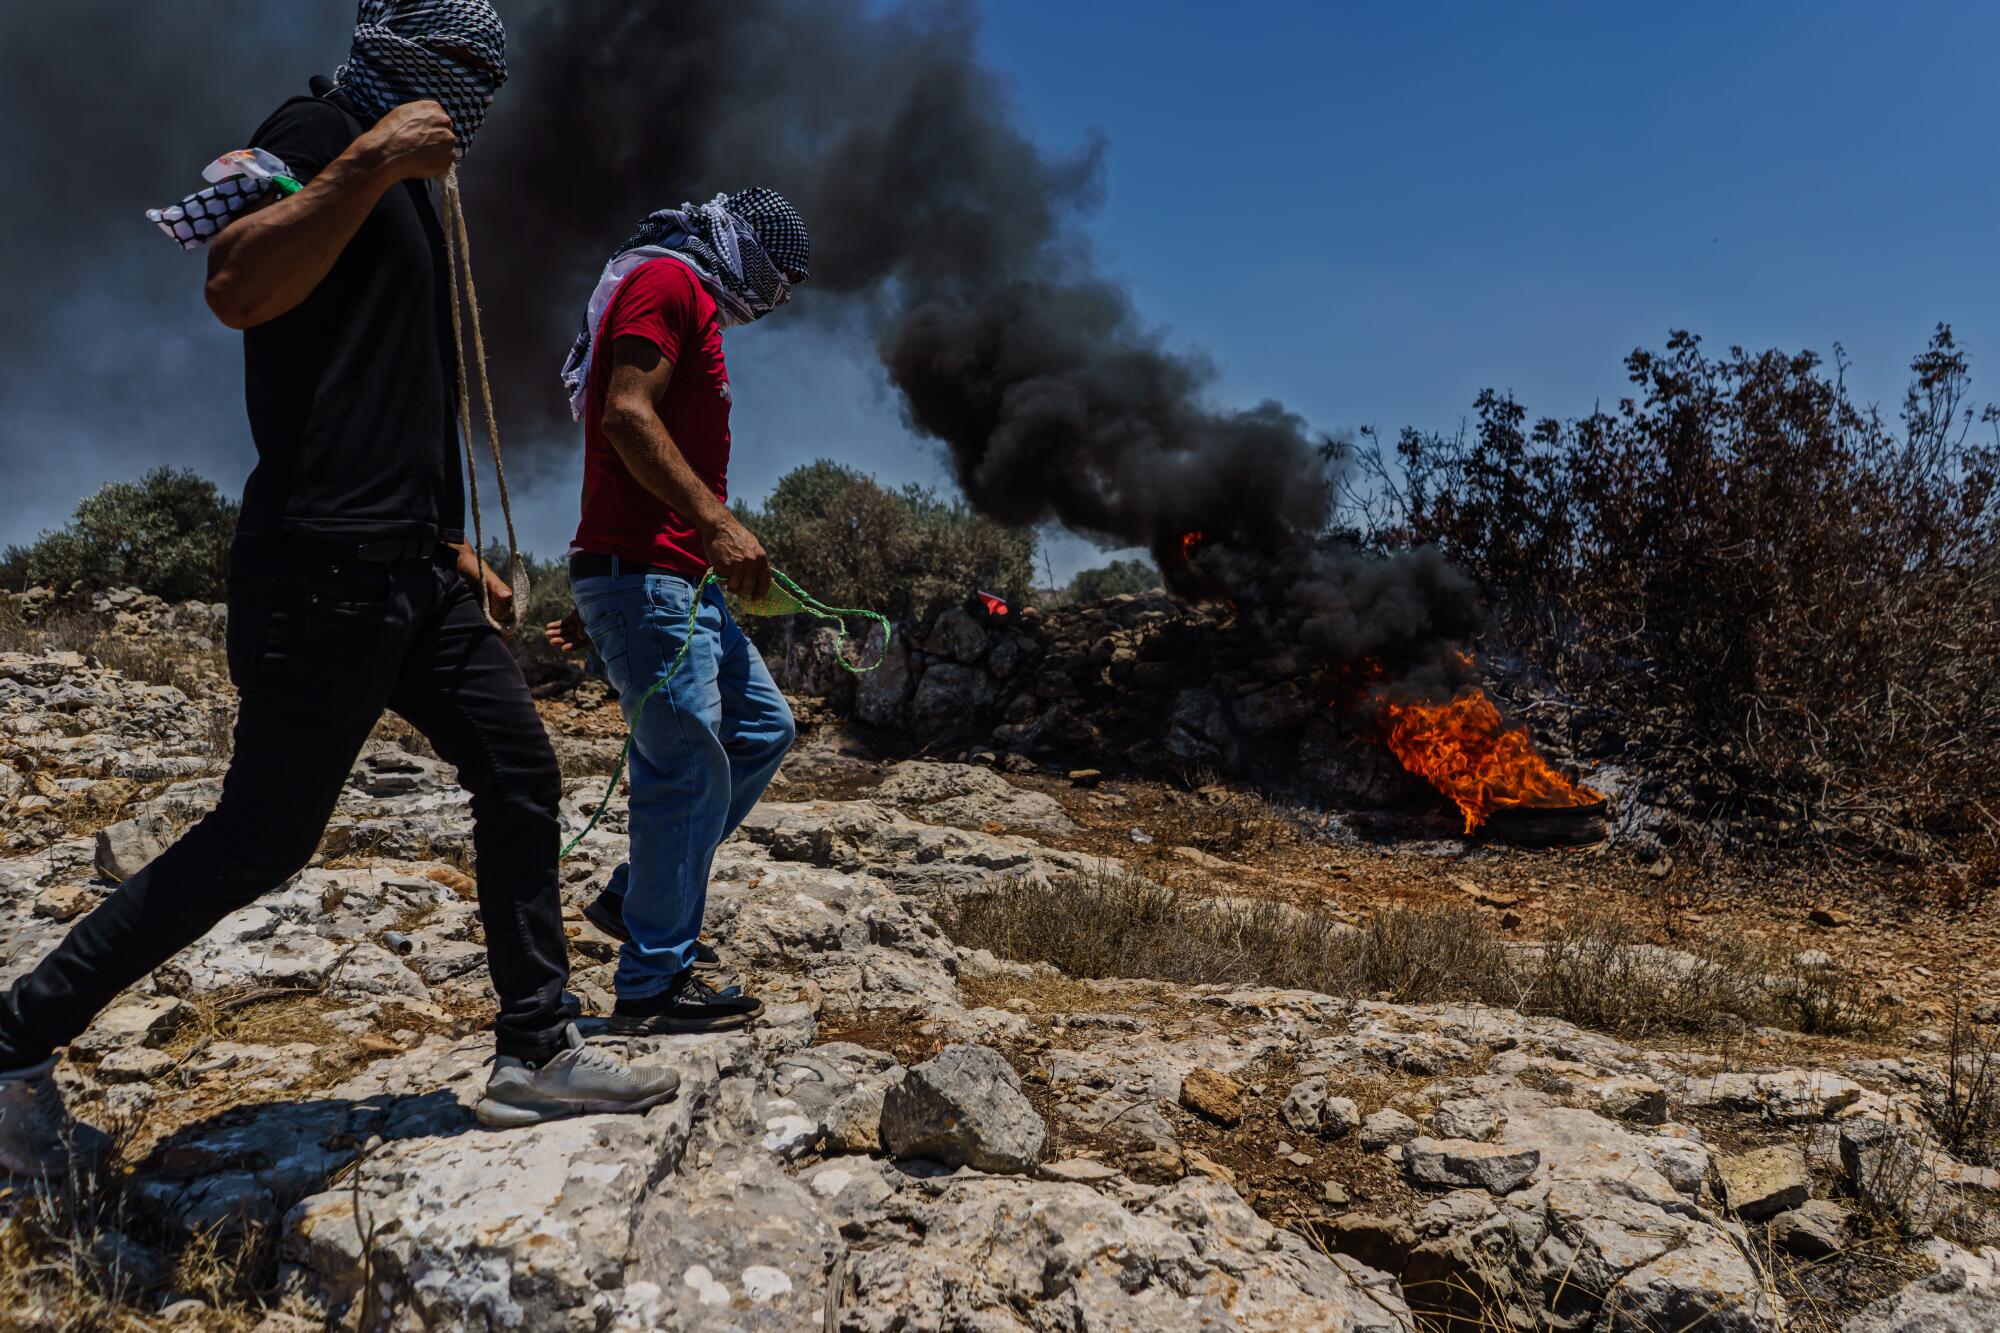 Smoke rises from a fire as Palestinians protest against West Bank Jewish settlement 